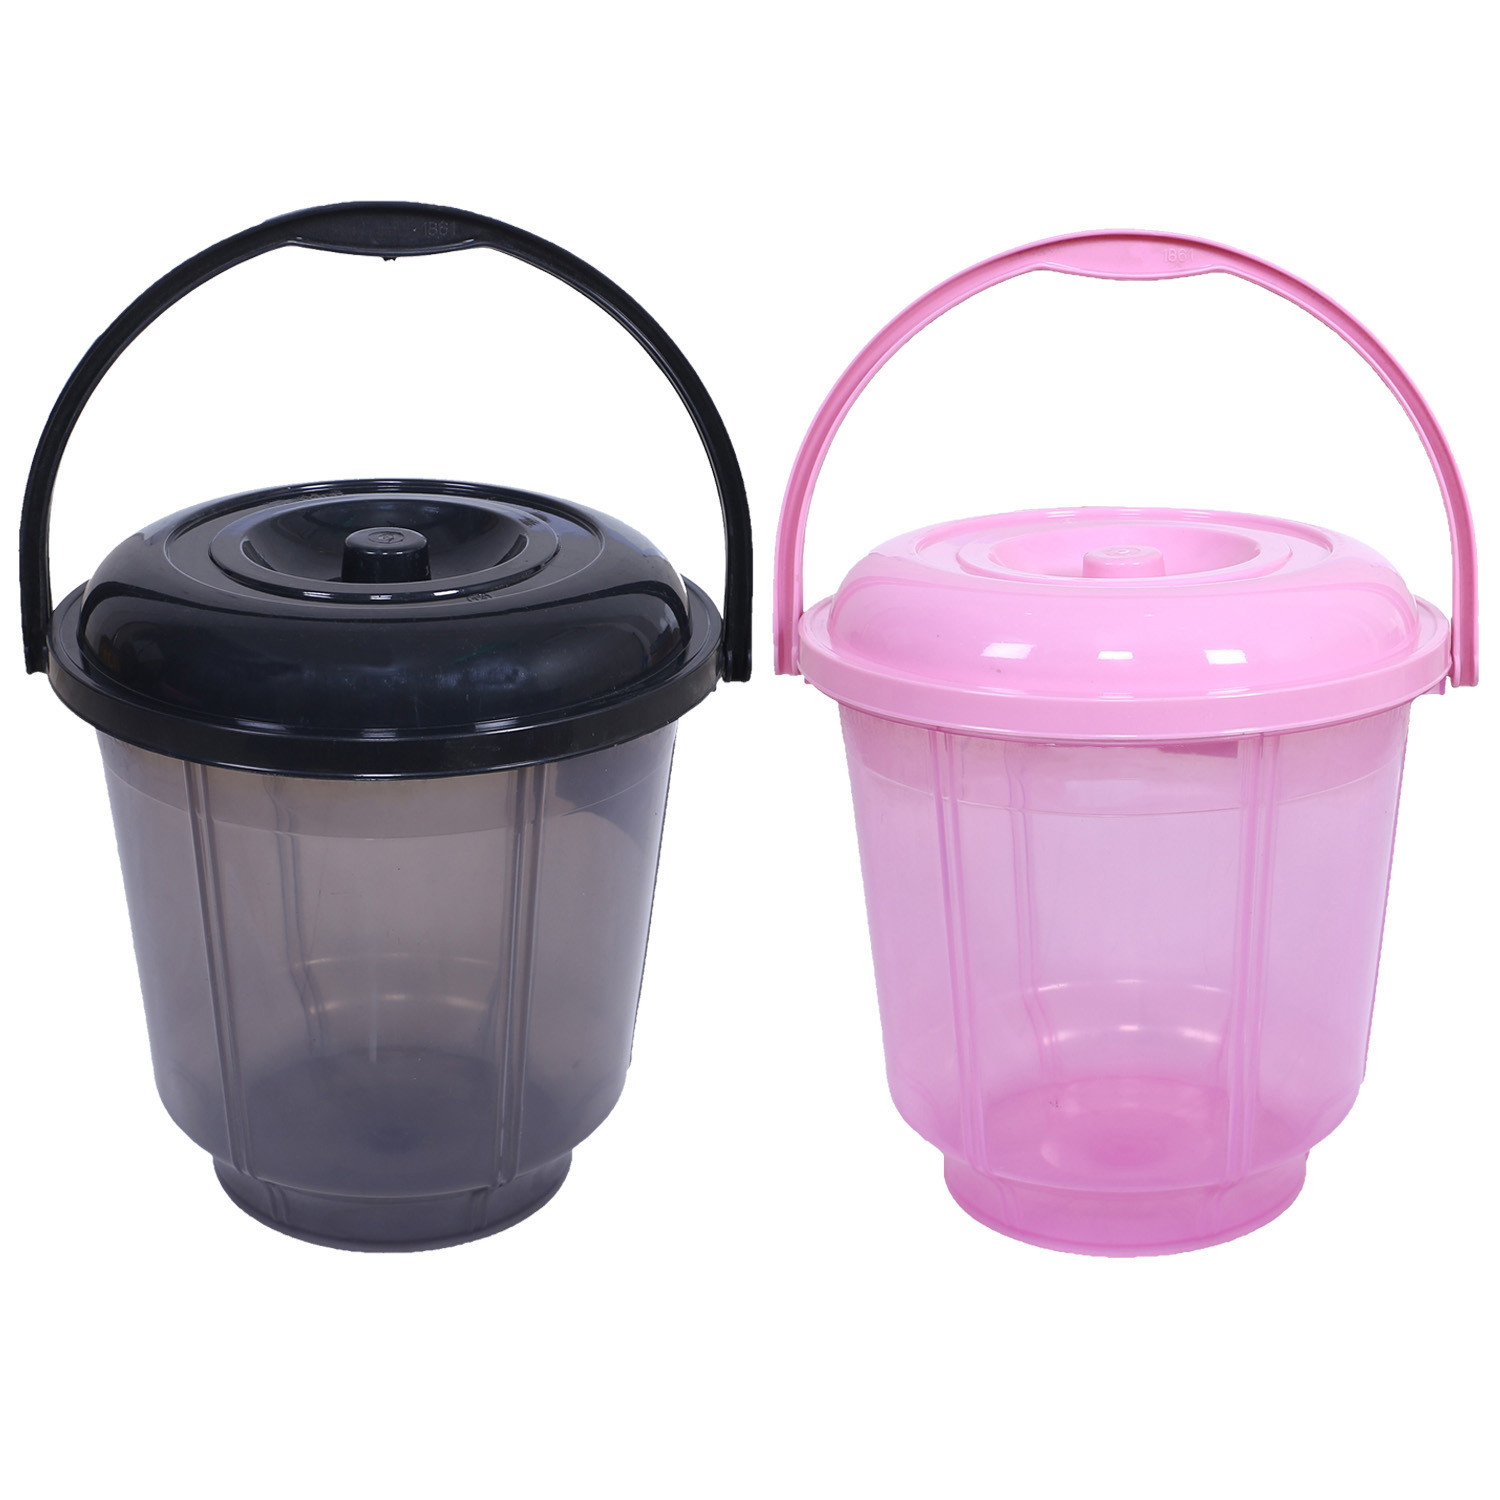 Kuber Industries Colorful Homeware Bucket|Unbreakable Plastic Bucket|Transparent Bucket with Lid & Handle for Bathroom,Home Use,13 Litre,Pack of 2 (Black & Pink)